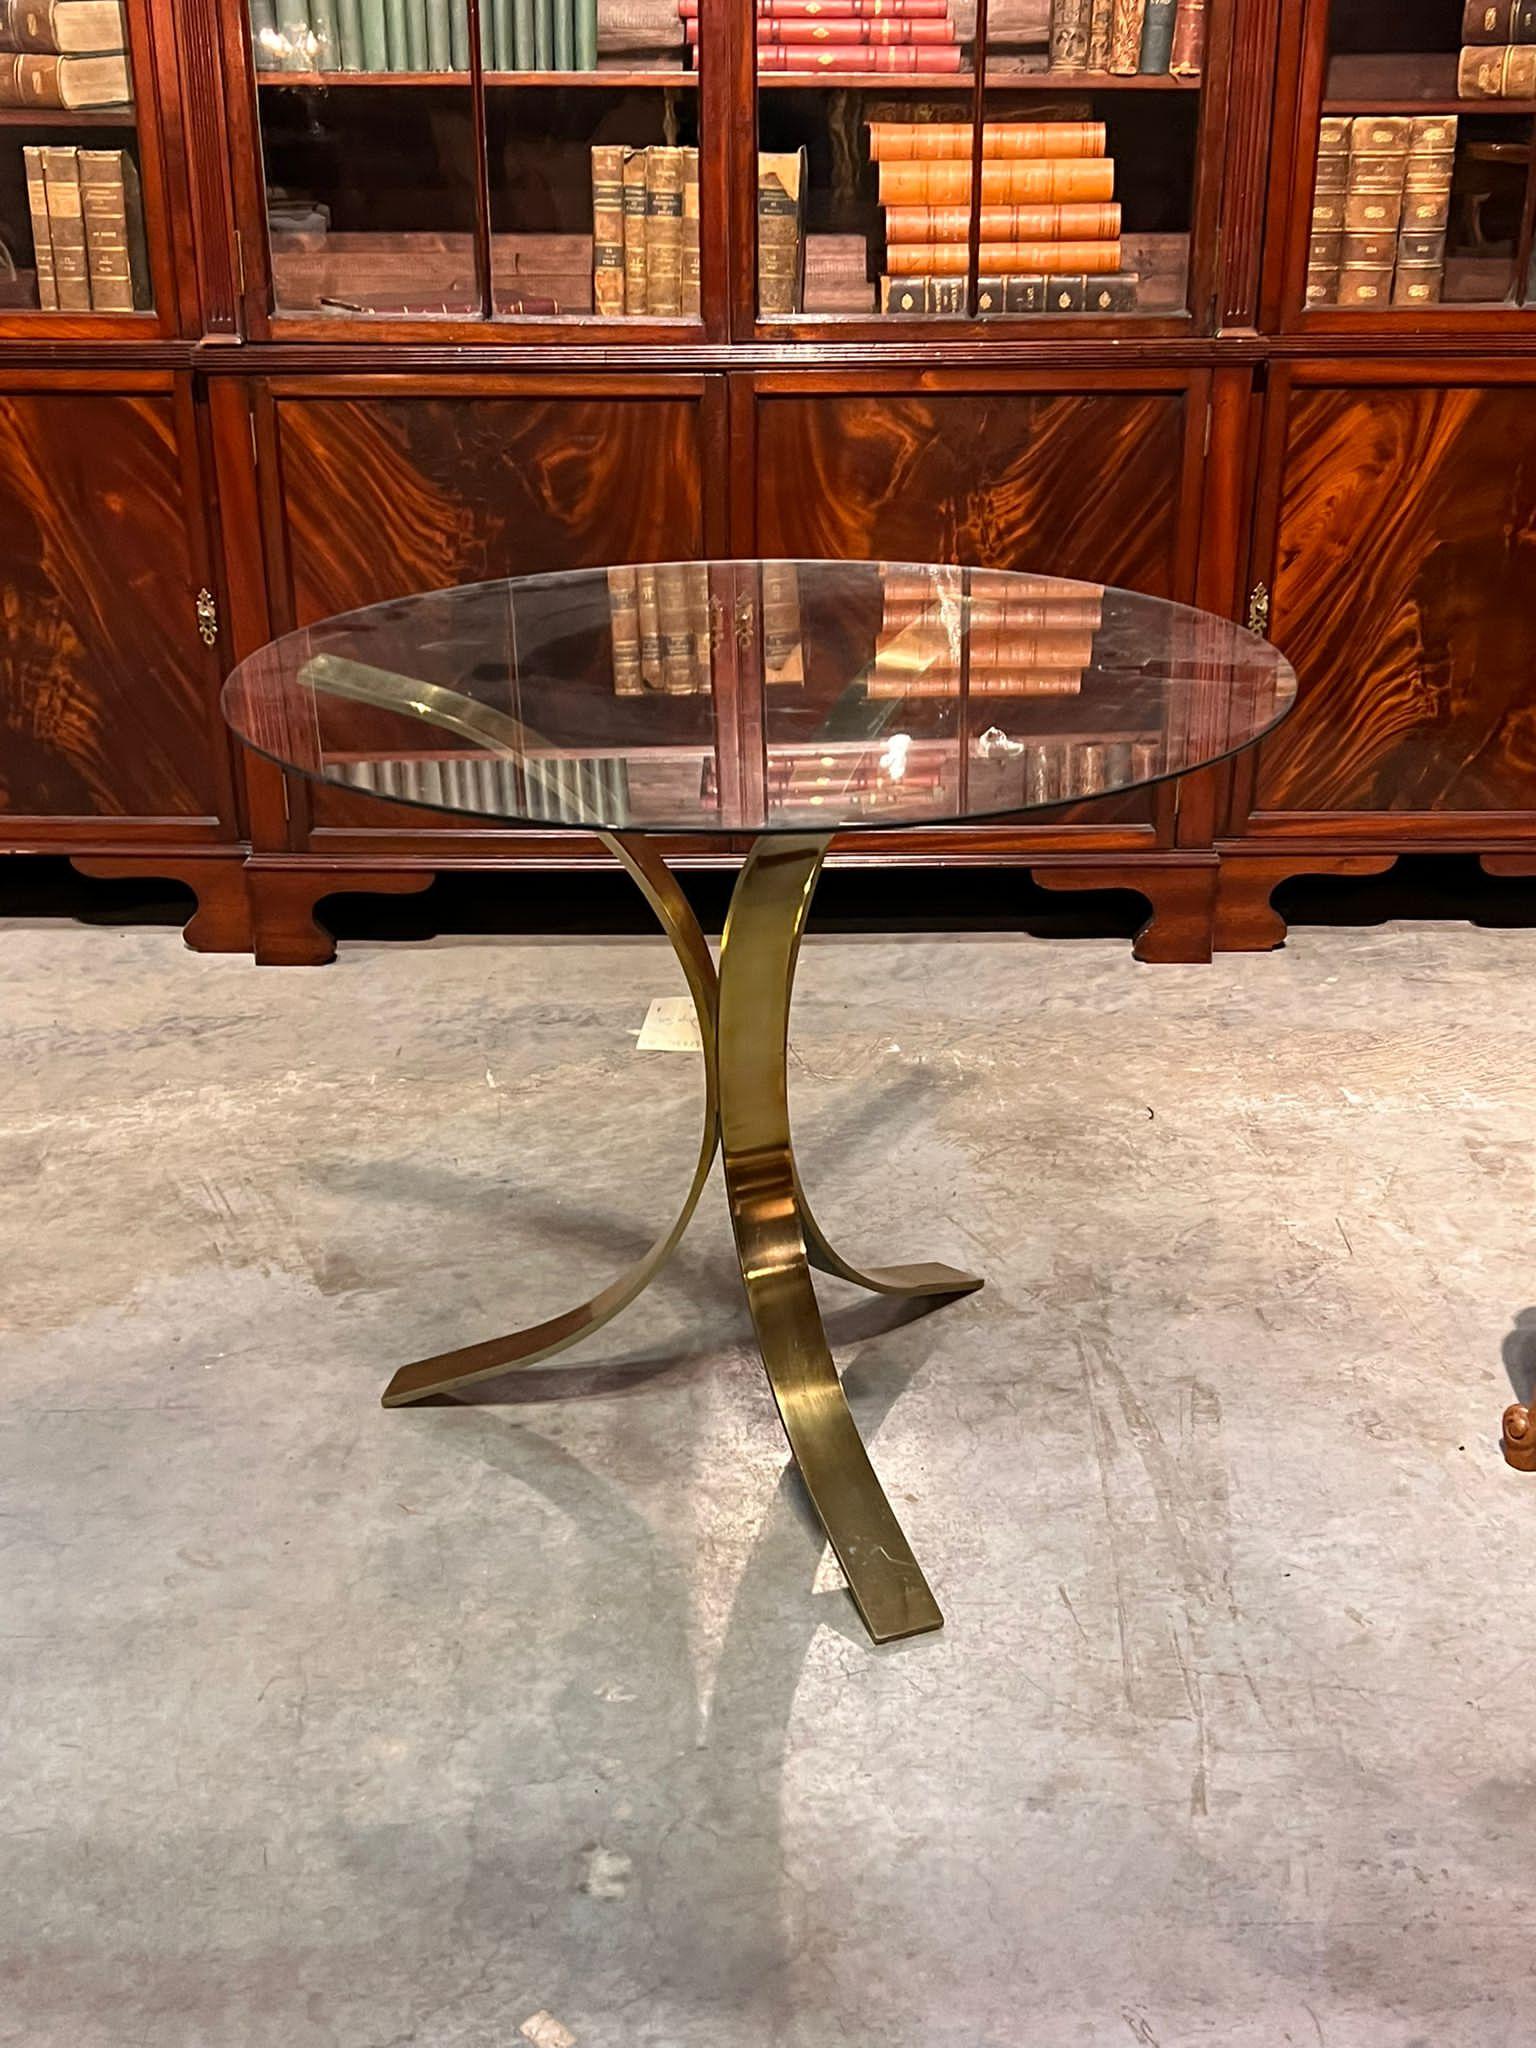 A beautiful Hollywood Regency style, Italian Round glass top table Designed by the renowned Italian Designer Osvaldo Borsani (see below). The high quality base is made from brass and the original circular glass top is in excellent condition.
Could